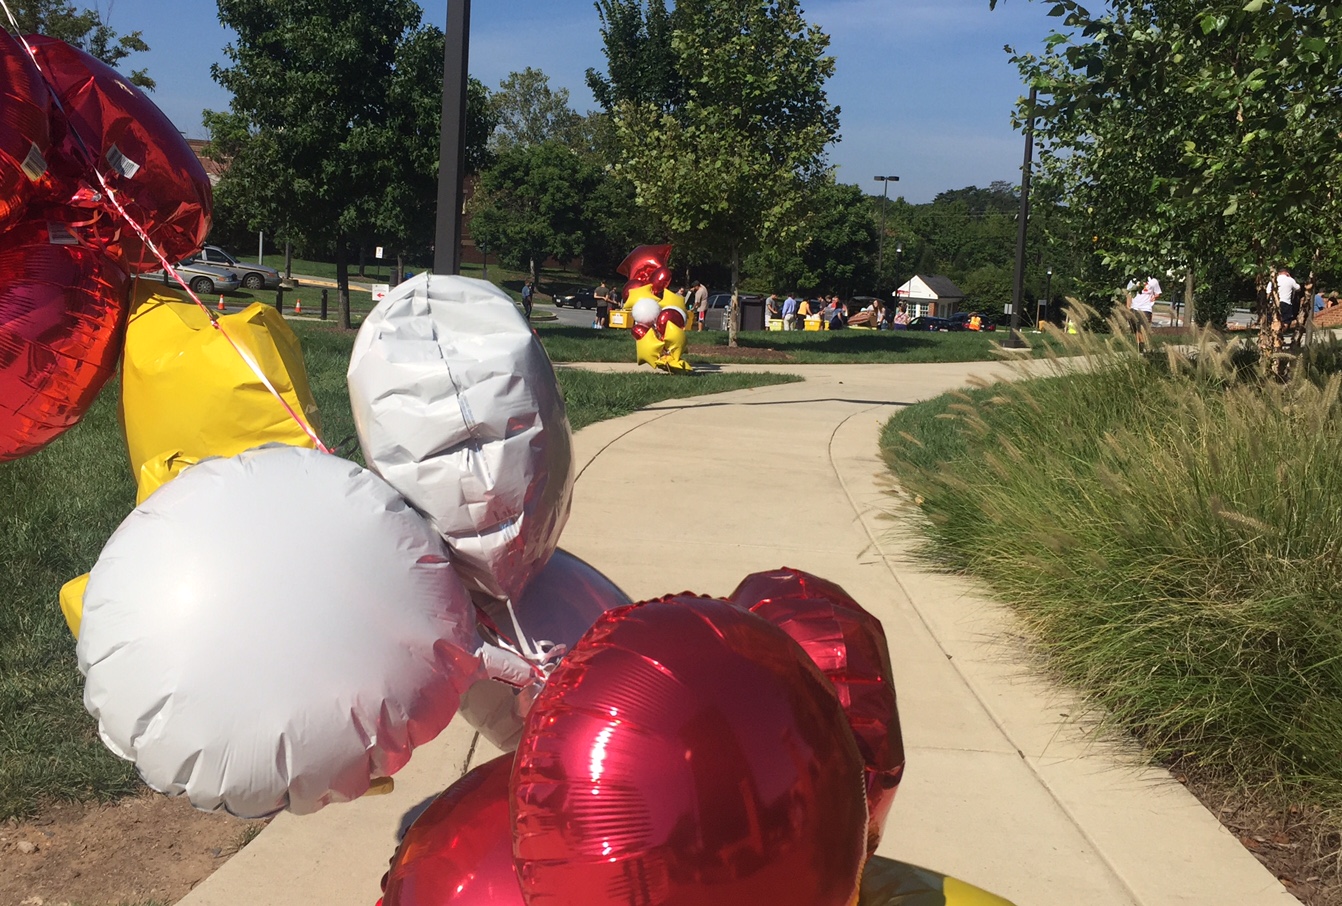 Festive balloons help welcome University of Maryland back to campus on Saturday, Aug. 27, 2016. (WTOP/Dennis Foley)